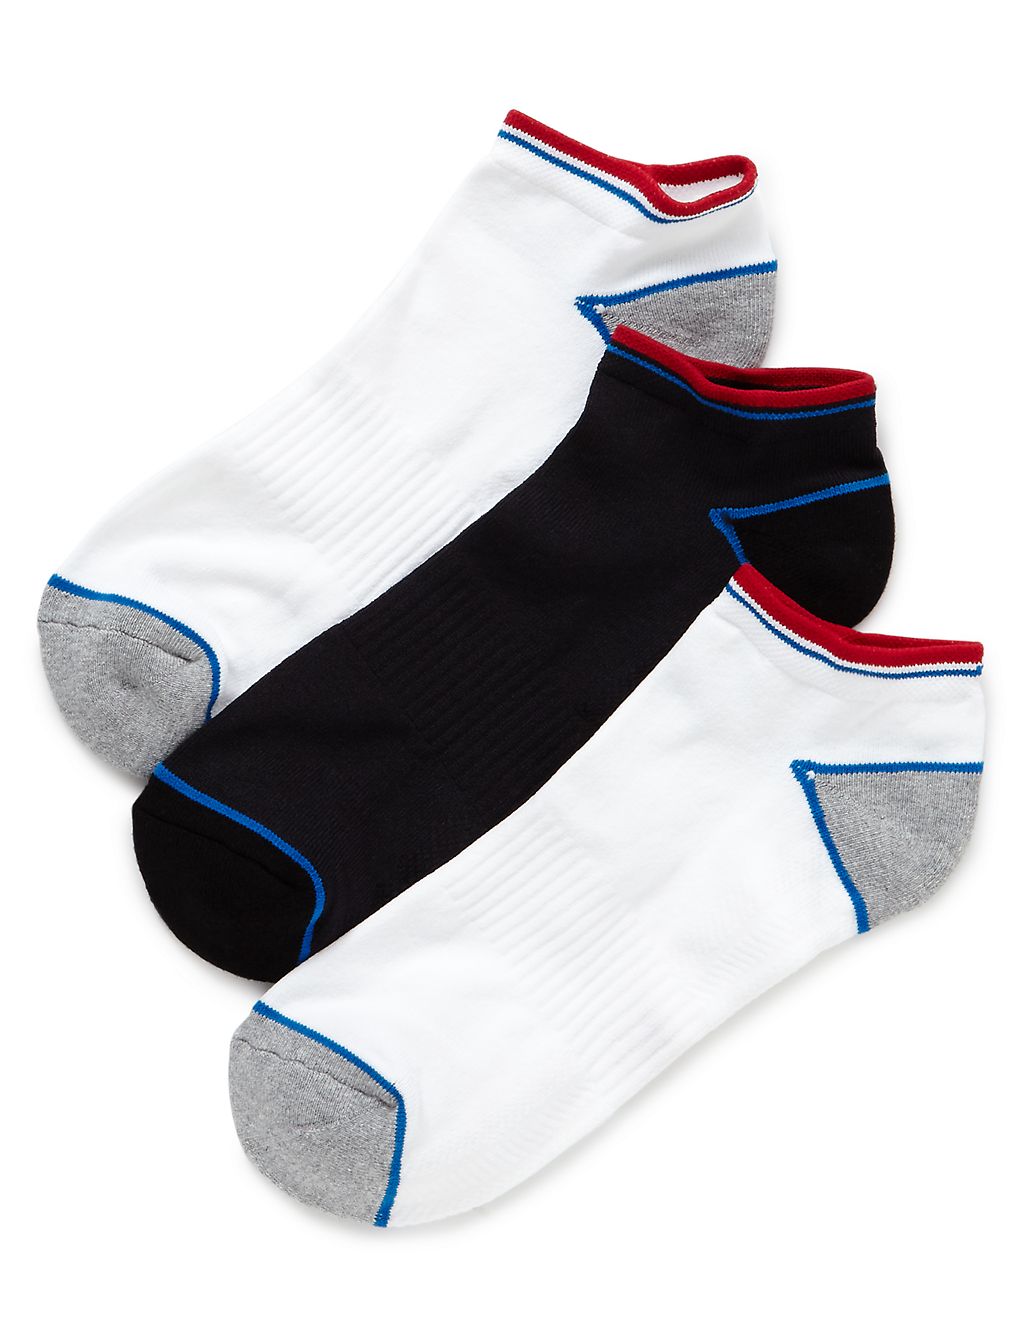 3 Pairs of Freshfeet™ Assorted Trainer Liner Socks with Silver Technology 1 of 1